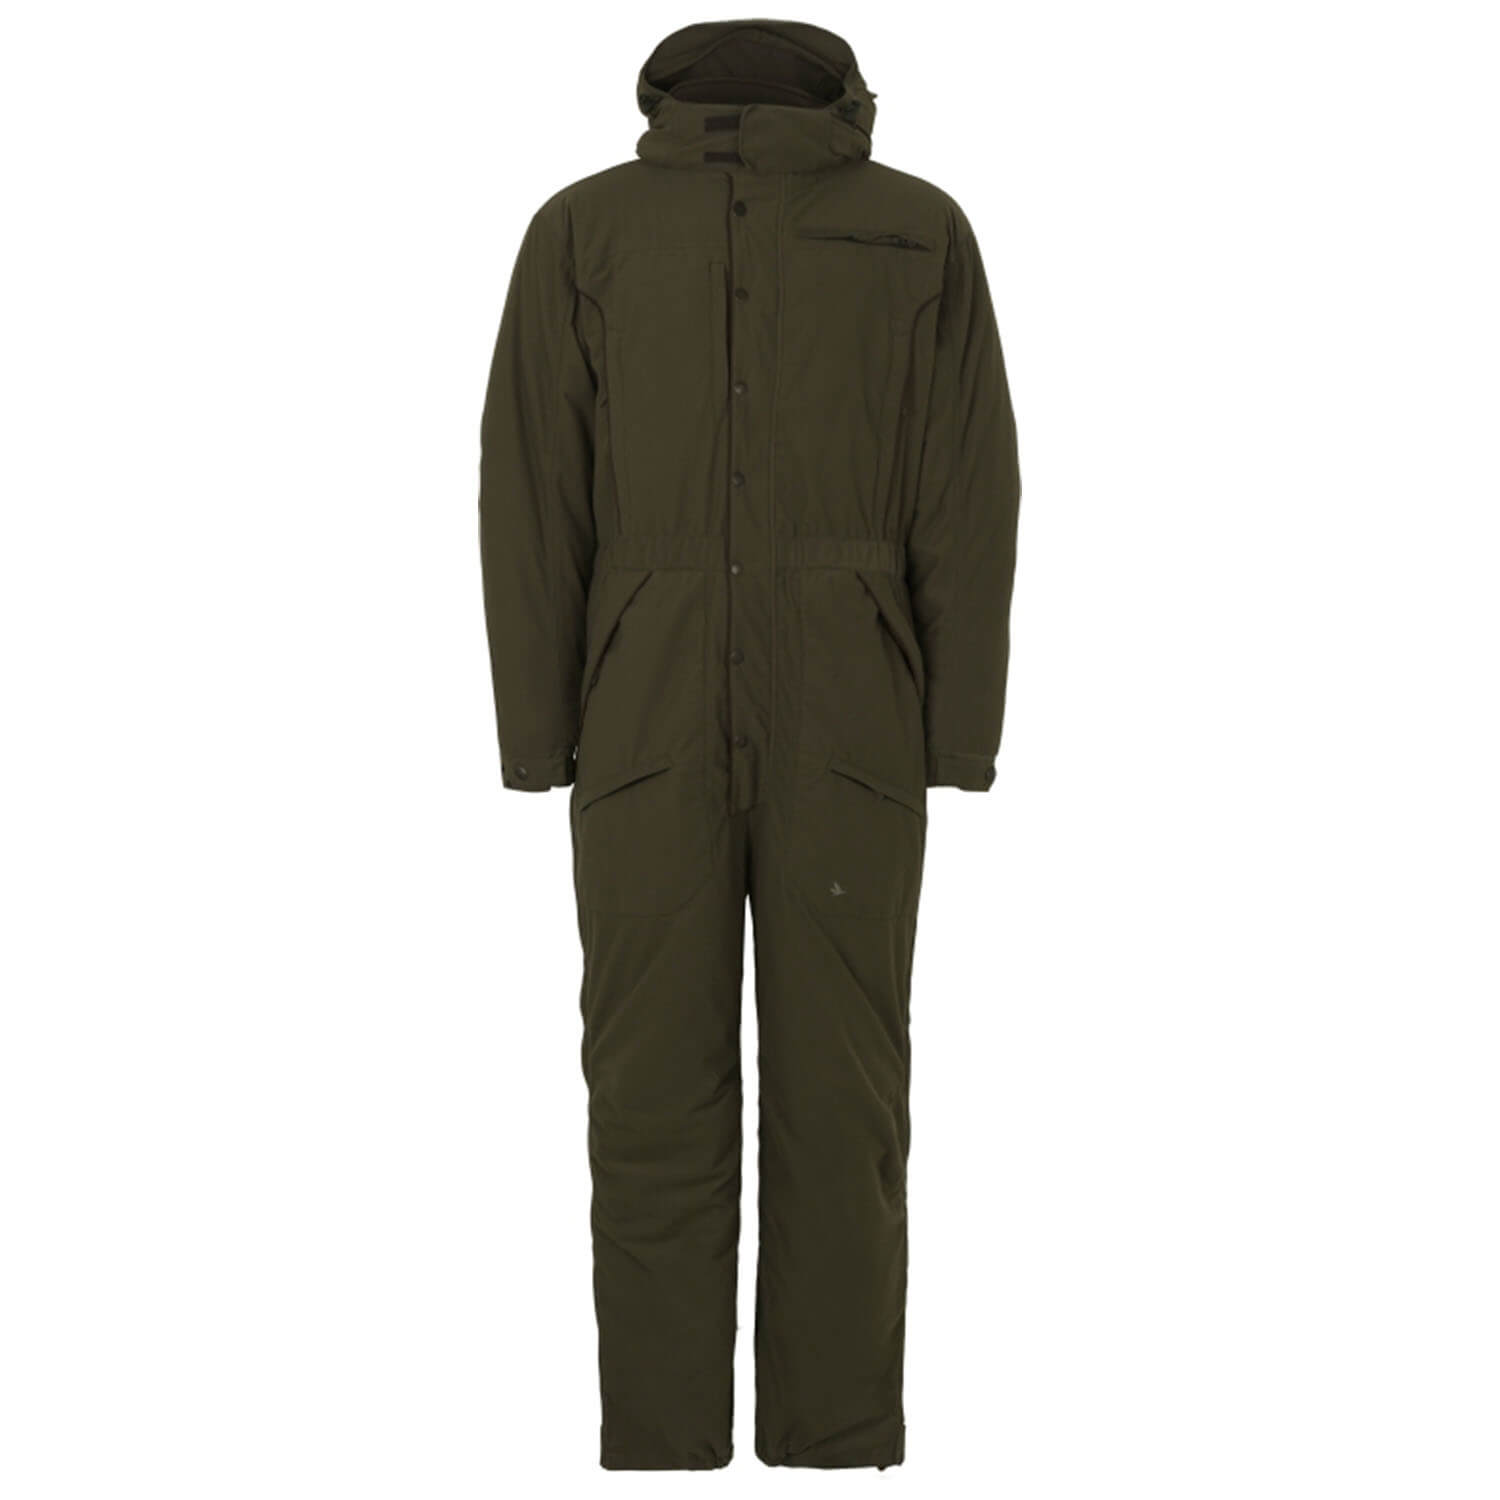 Seeland Overall Outthere (pine green)